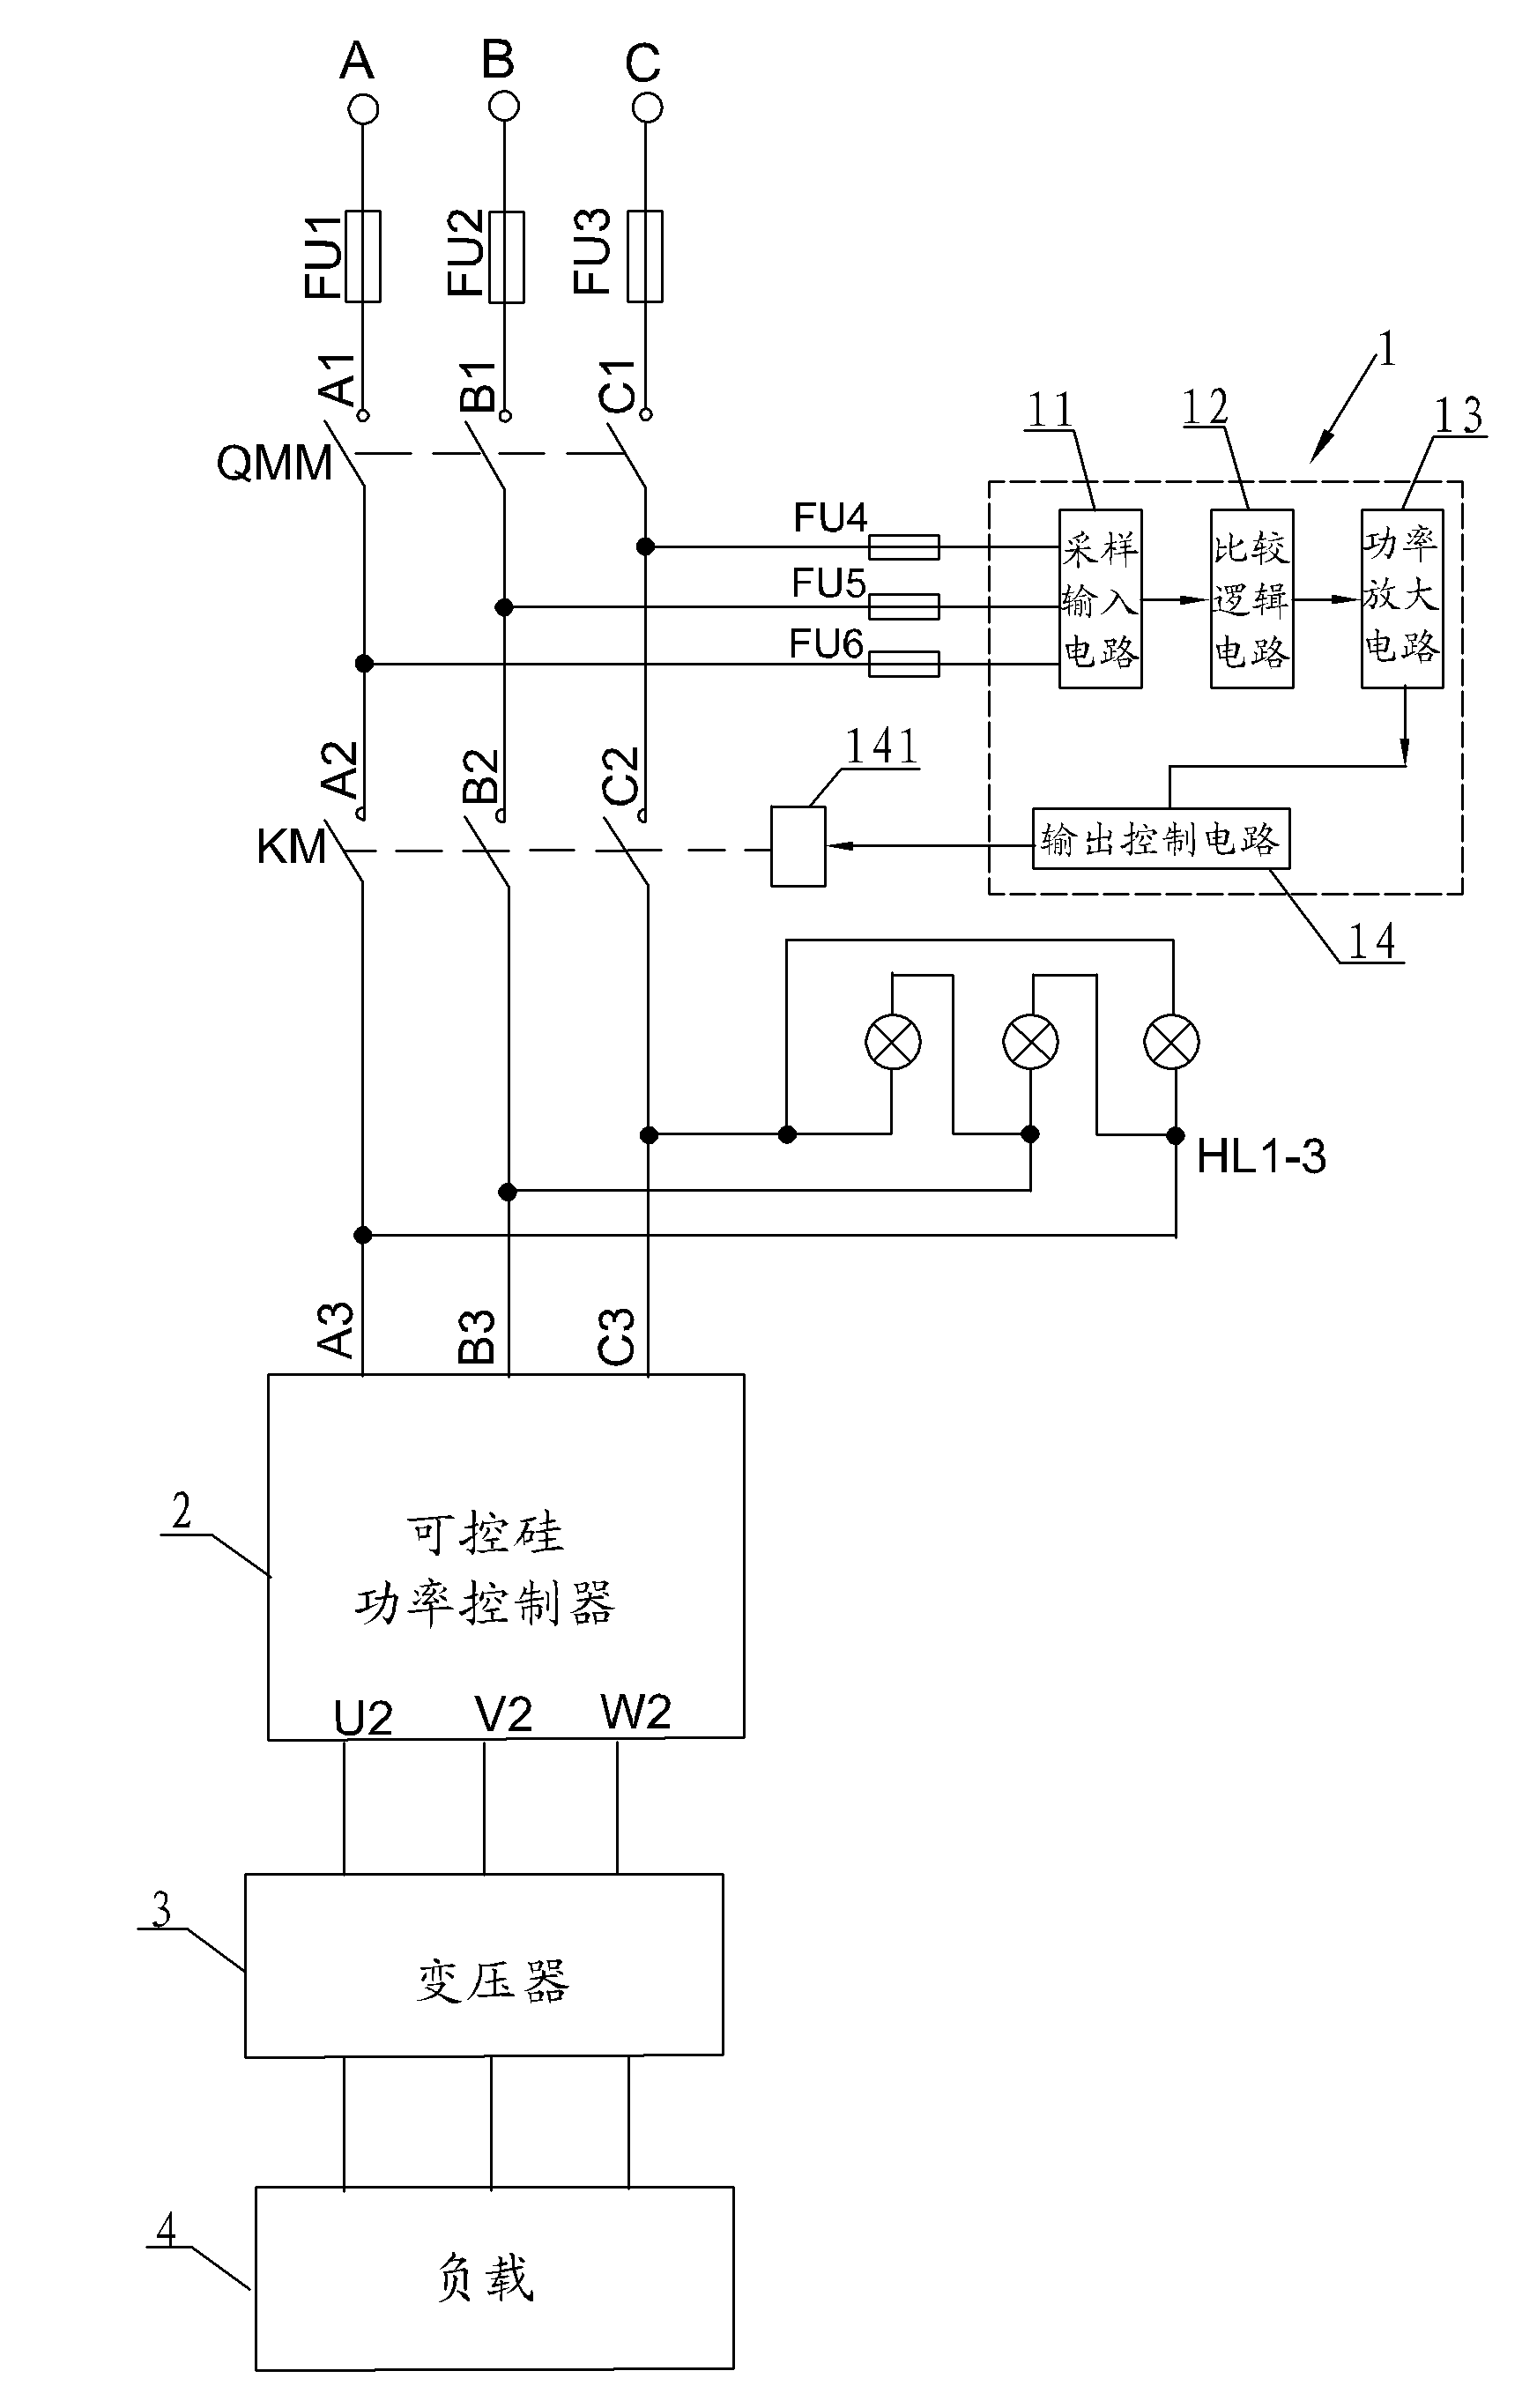 Thyristor pressure regulator with phase sequence protection